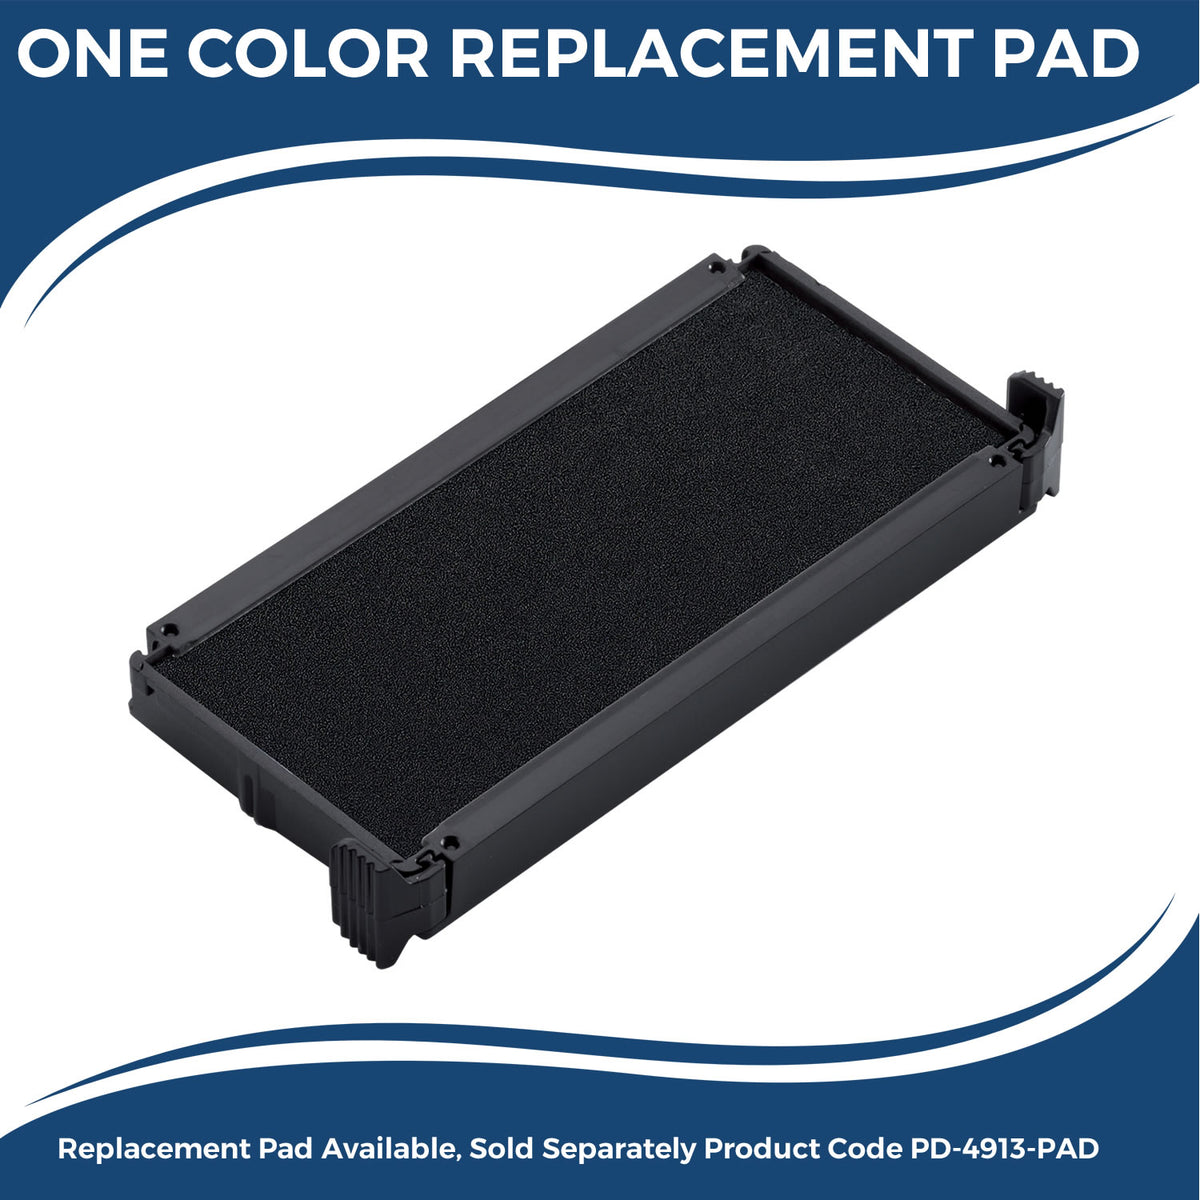 Large Self-Inking Social Distancing Stamp 5512S Large Replacment Pad